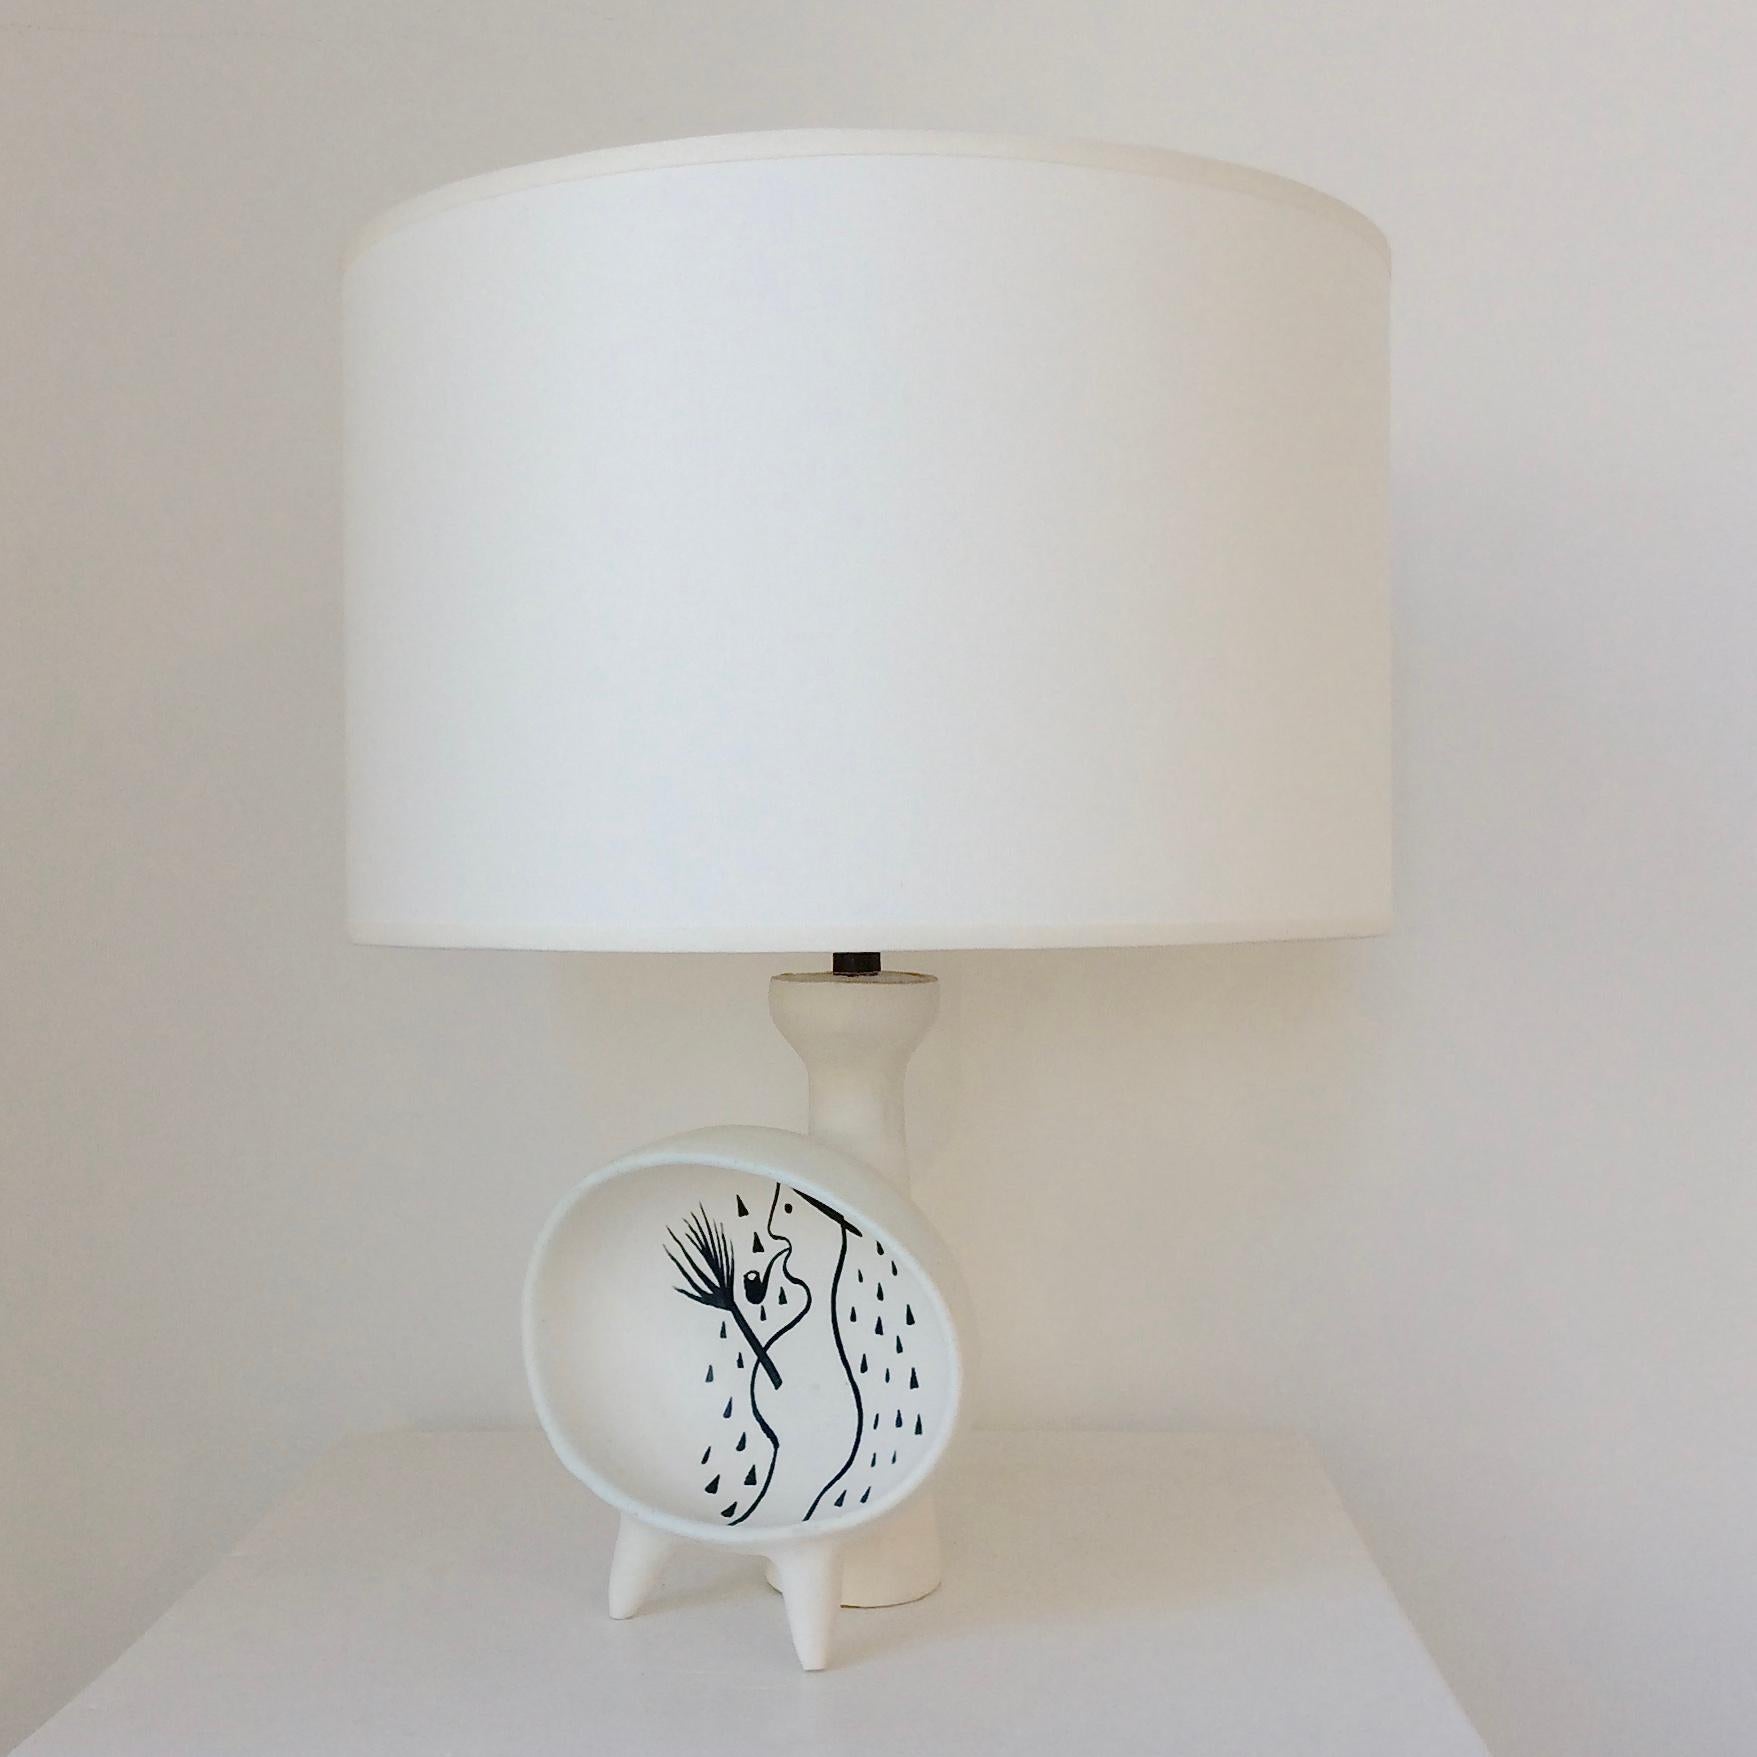 Rare Roger Capron table lamp, circa 1955, France.
White enameled ceramic, black snowman decor ( drawing inspired by Jacques Prévert's poem: song for children in winter ).
Rewired, new fabric shade.
One E27 bulb of 40 w.
Dimensions: total height 35